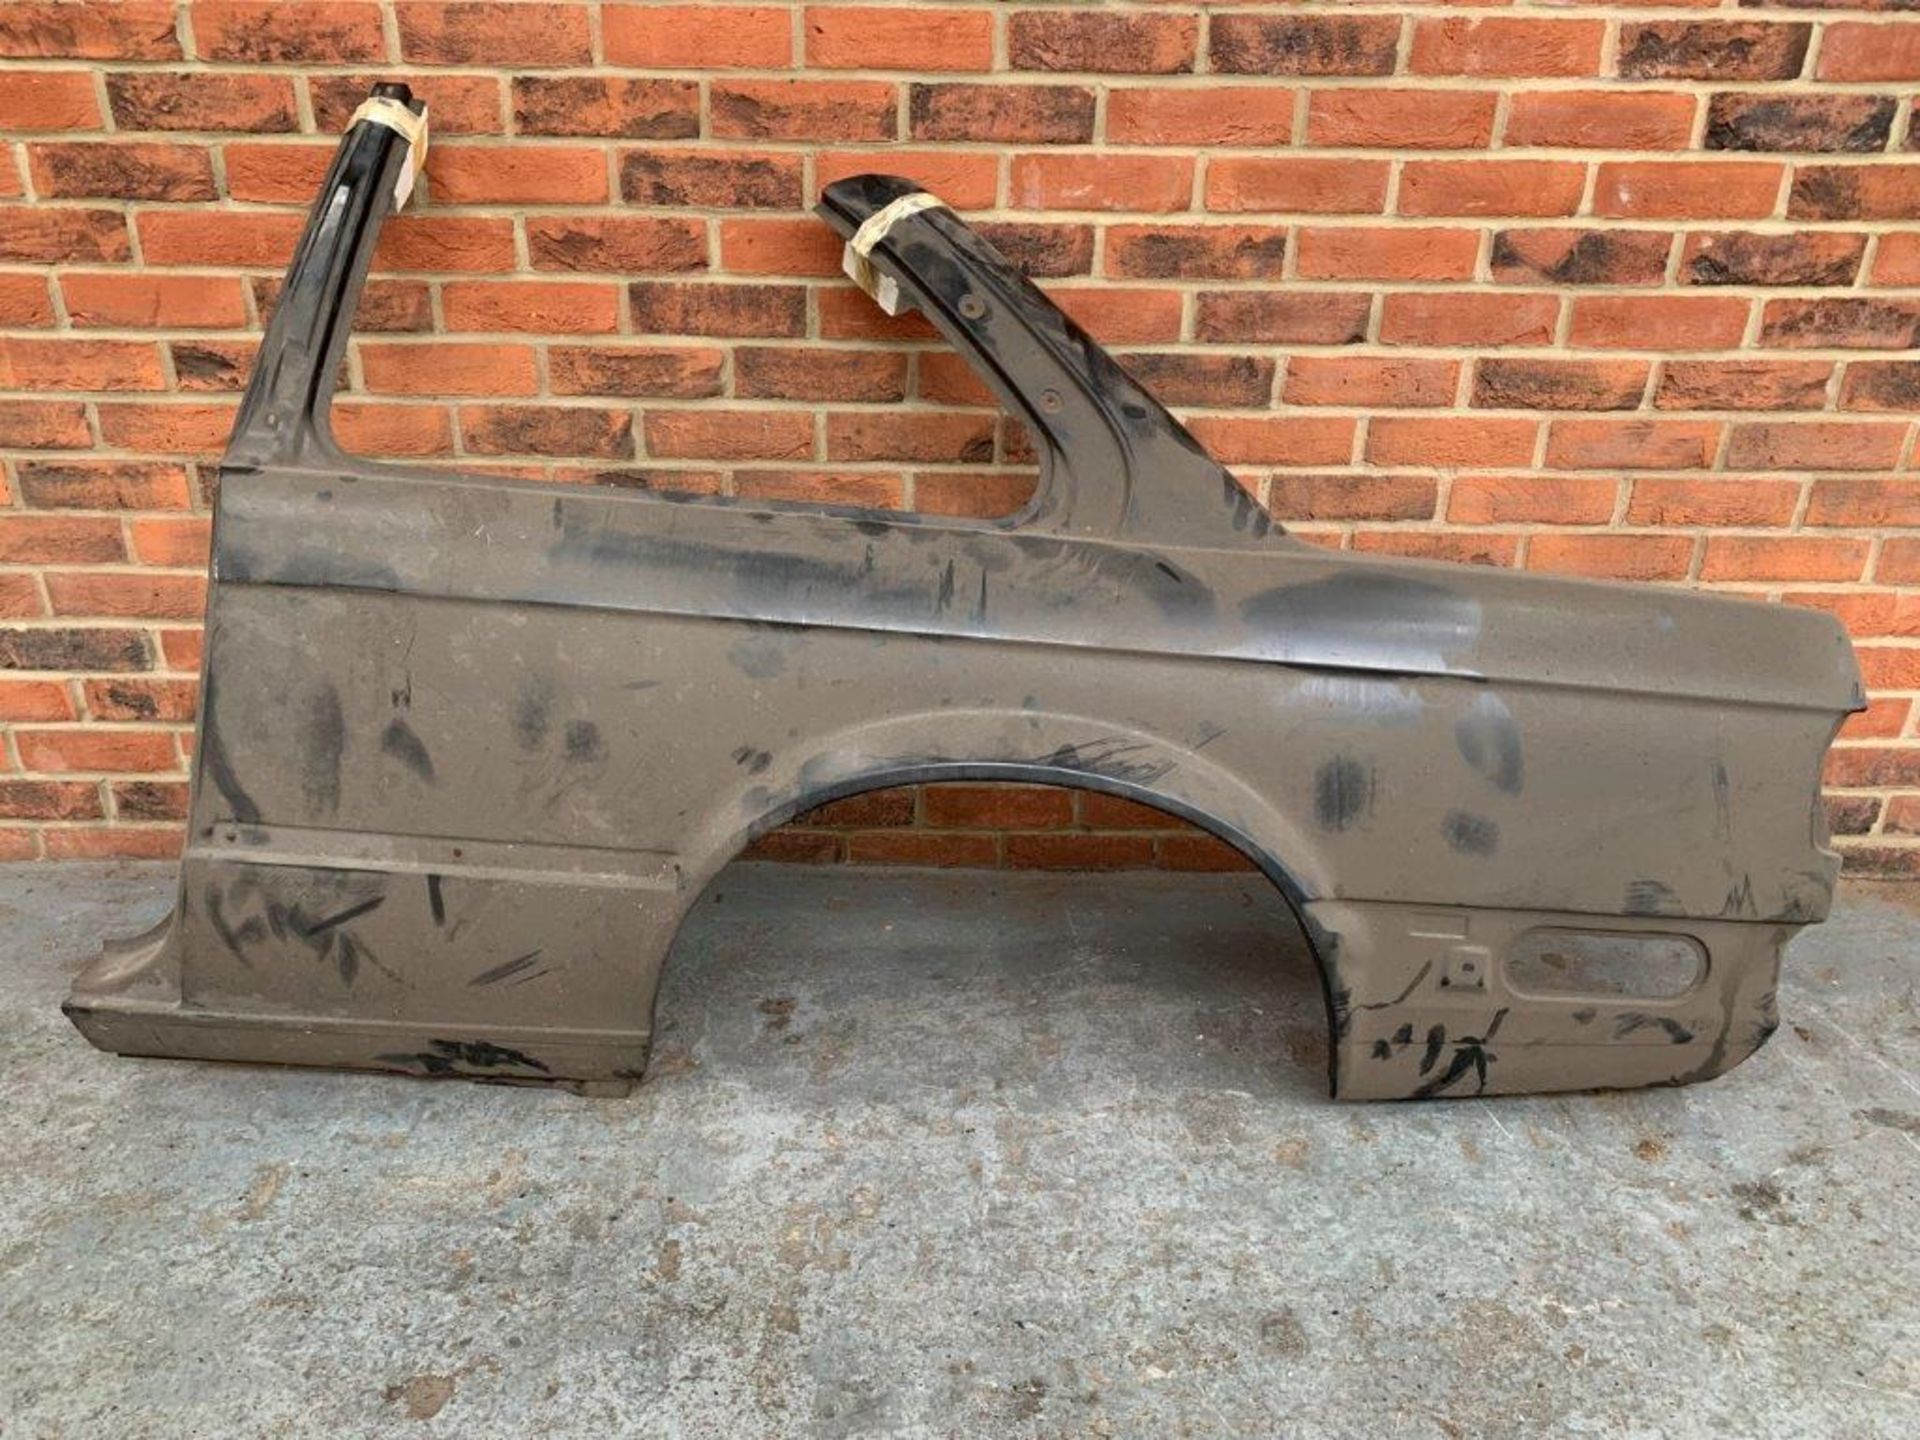 New Old Stock BMW E30 Rear Quarter Panels - Image 5 of 7